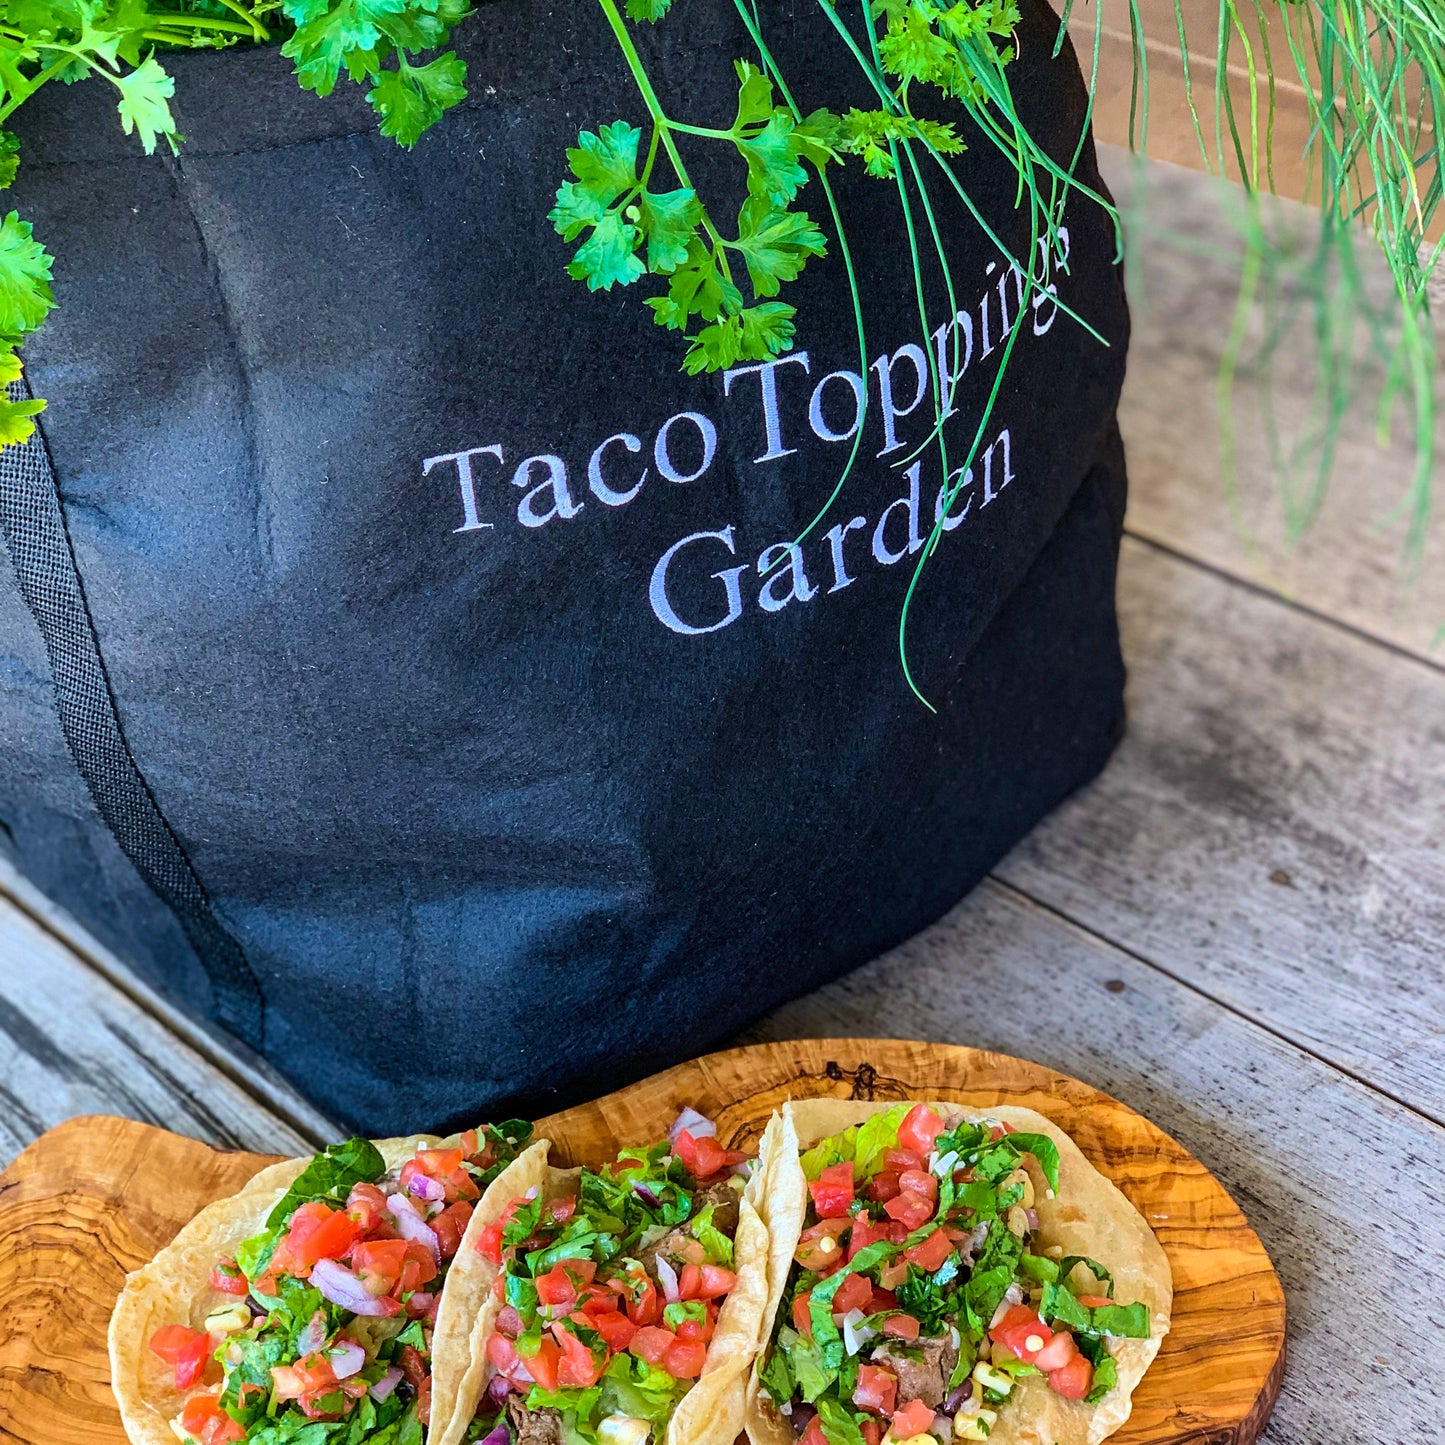 Taco Toppings Garden Kit‎ with peppers + seasonal herbs